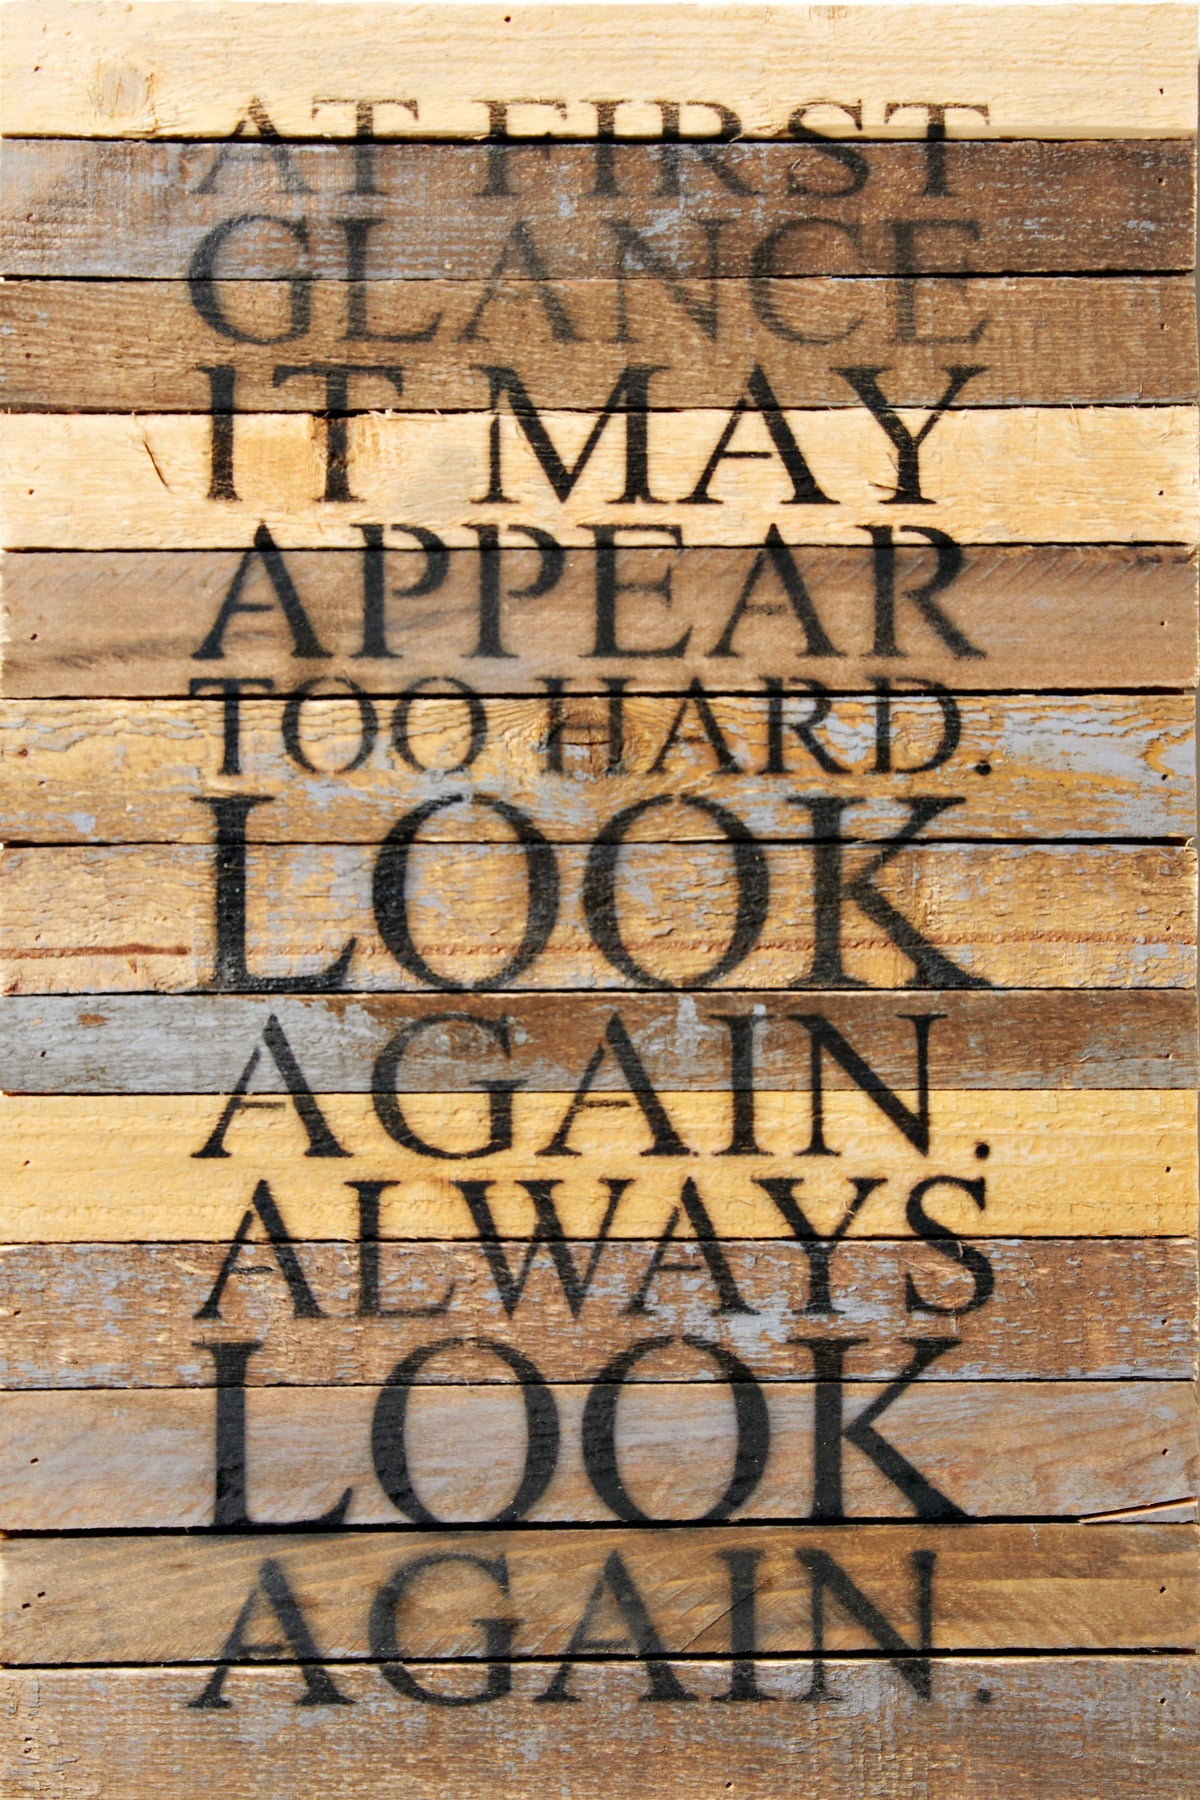 At first glance it may appear too hard. Look again. Always look again. / 12x18 Reclaimed Wood Wall Art